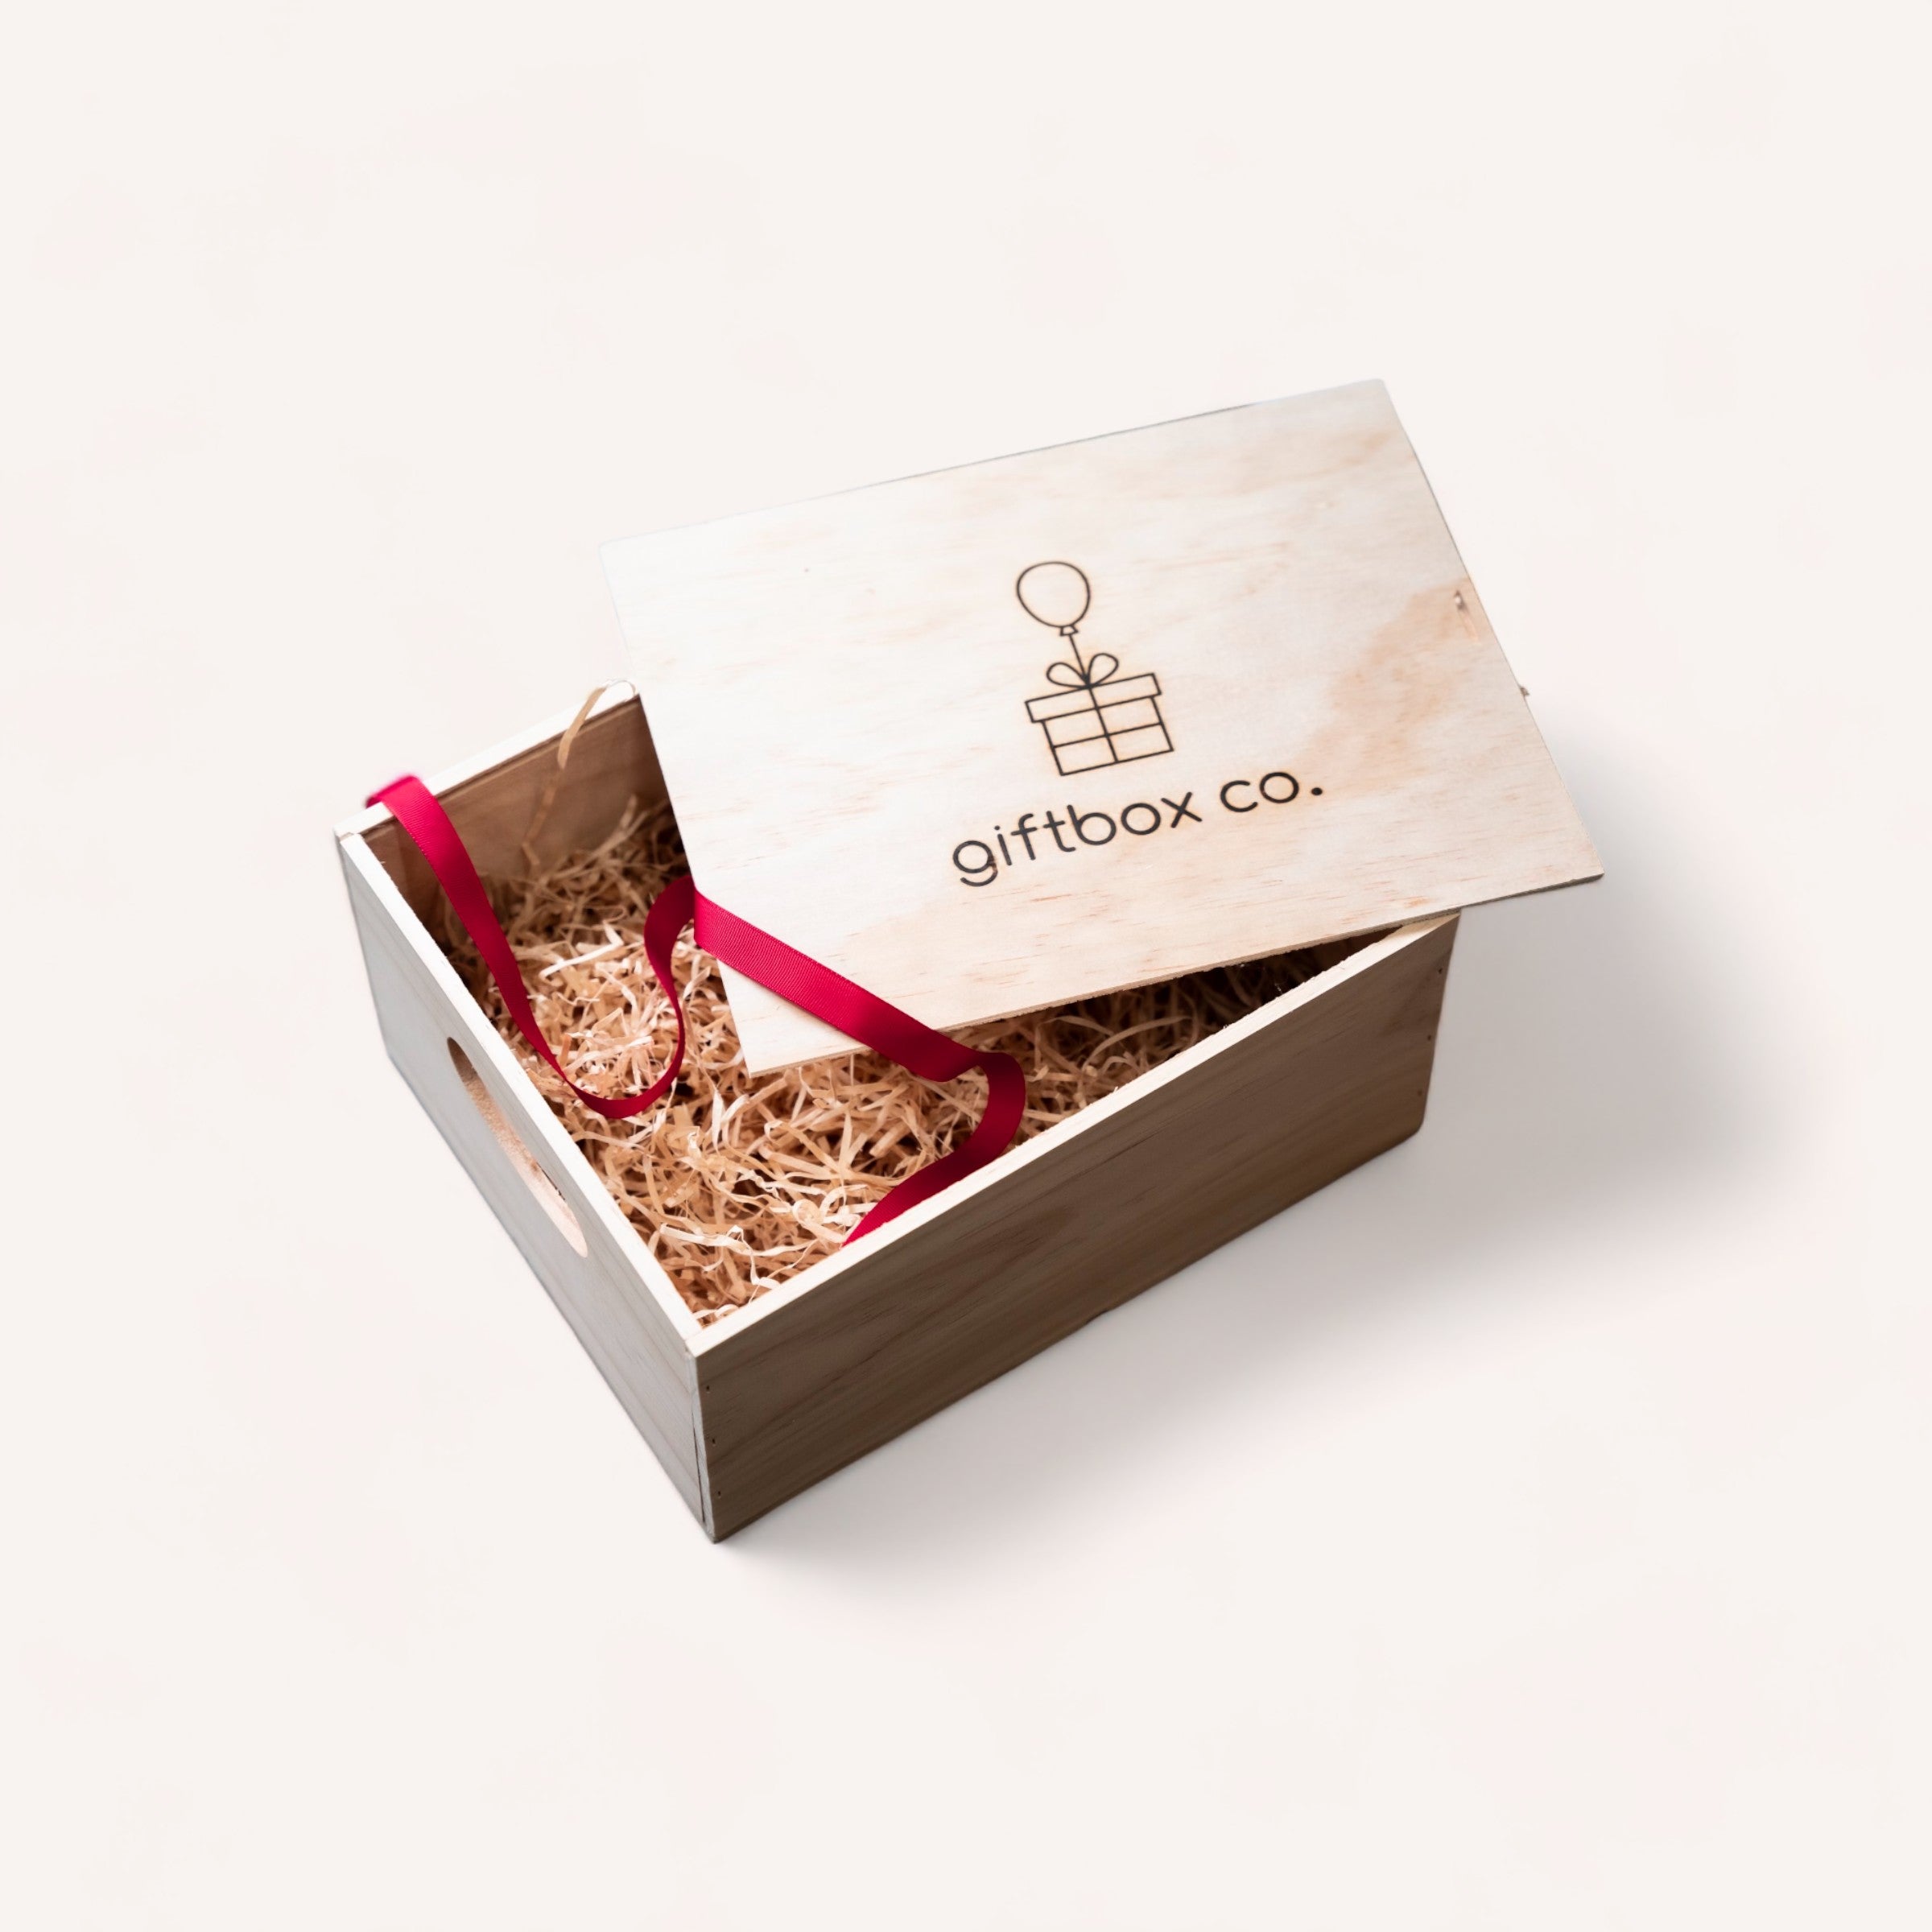 An elegant Build Your Own Giftbox with a sliding lid, branded with "giftbox co." and a ribbon accent, is partially open to reveal decorative filler material and a personalised gift inside, suggesting a thoughtful present.